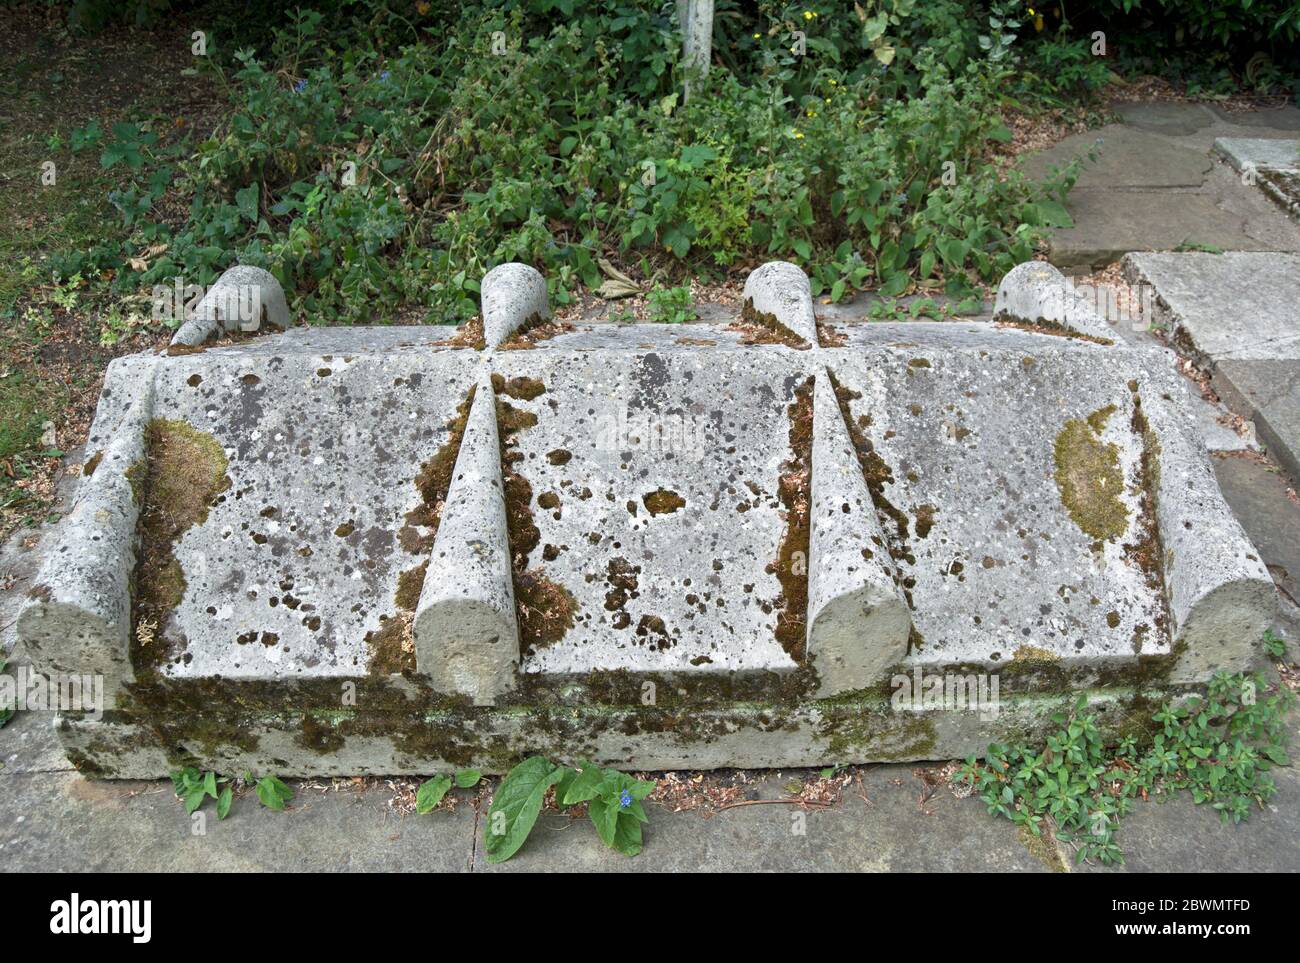 the sidmouth tomb at the church of st mary the virgin, mortlake, london, england, the burial place of 1801-1804 prime minister, henry addington Stock Photo